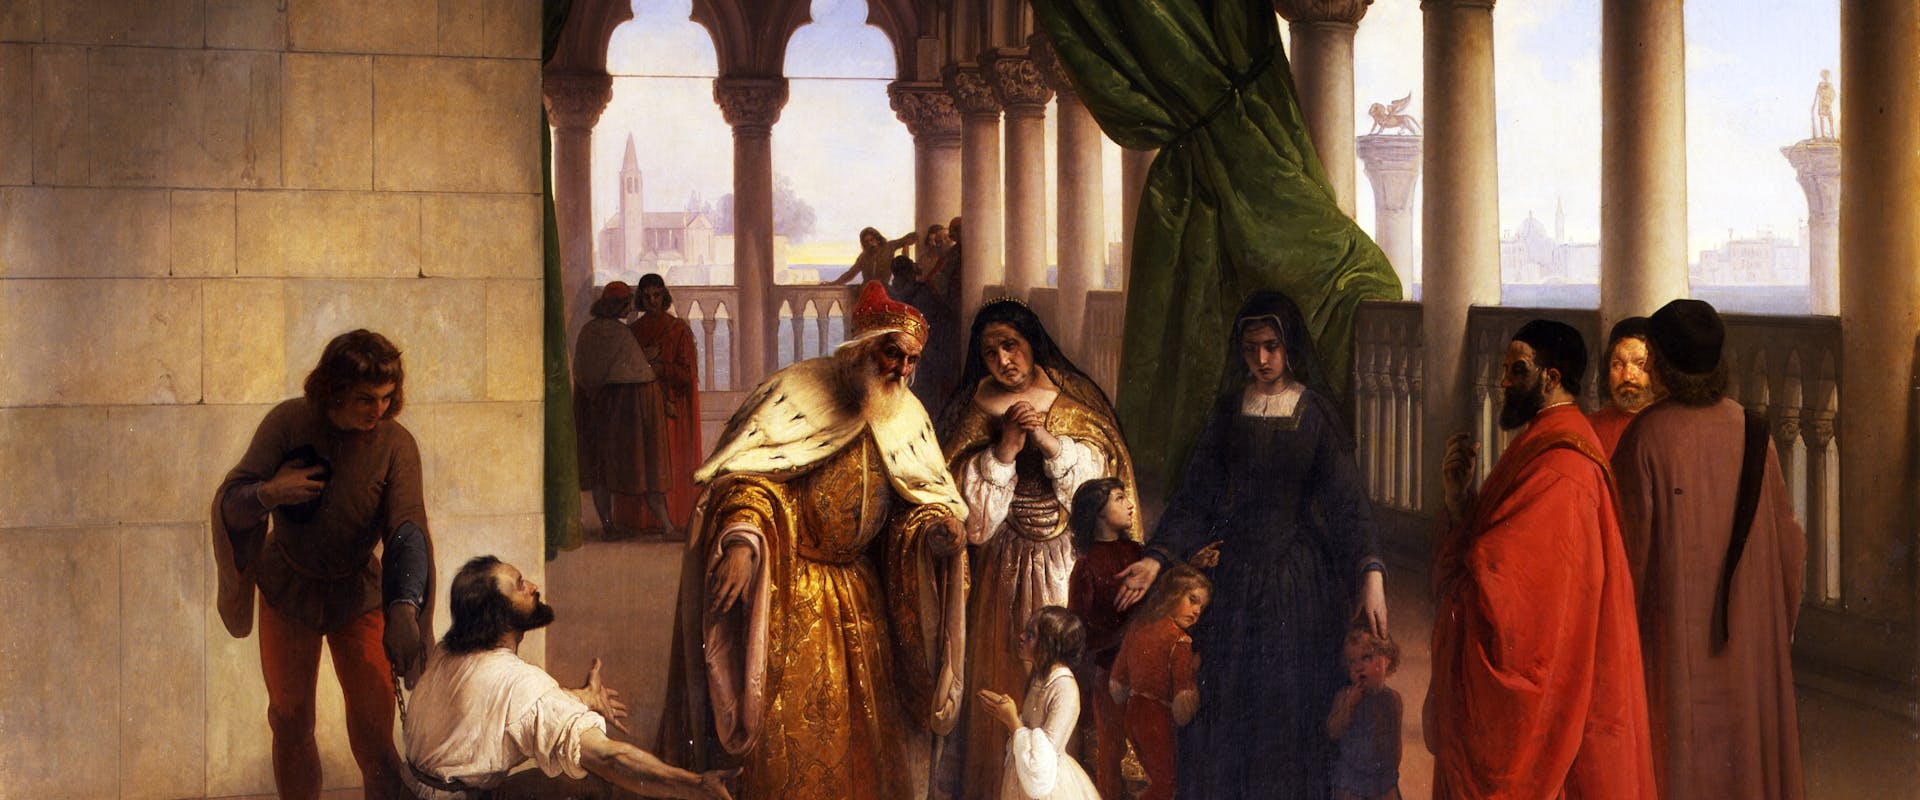 The two Foscari by Francesco Hayez at the Gallery of Modern Art